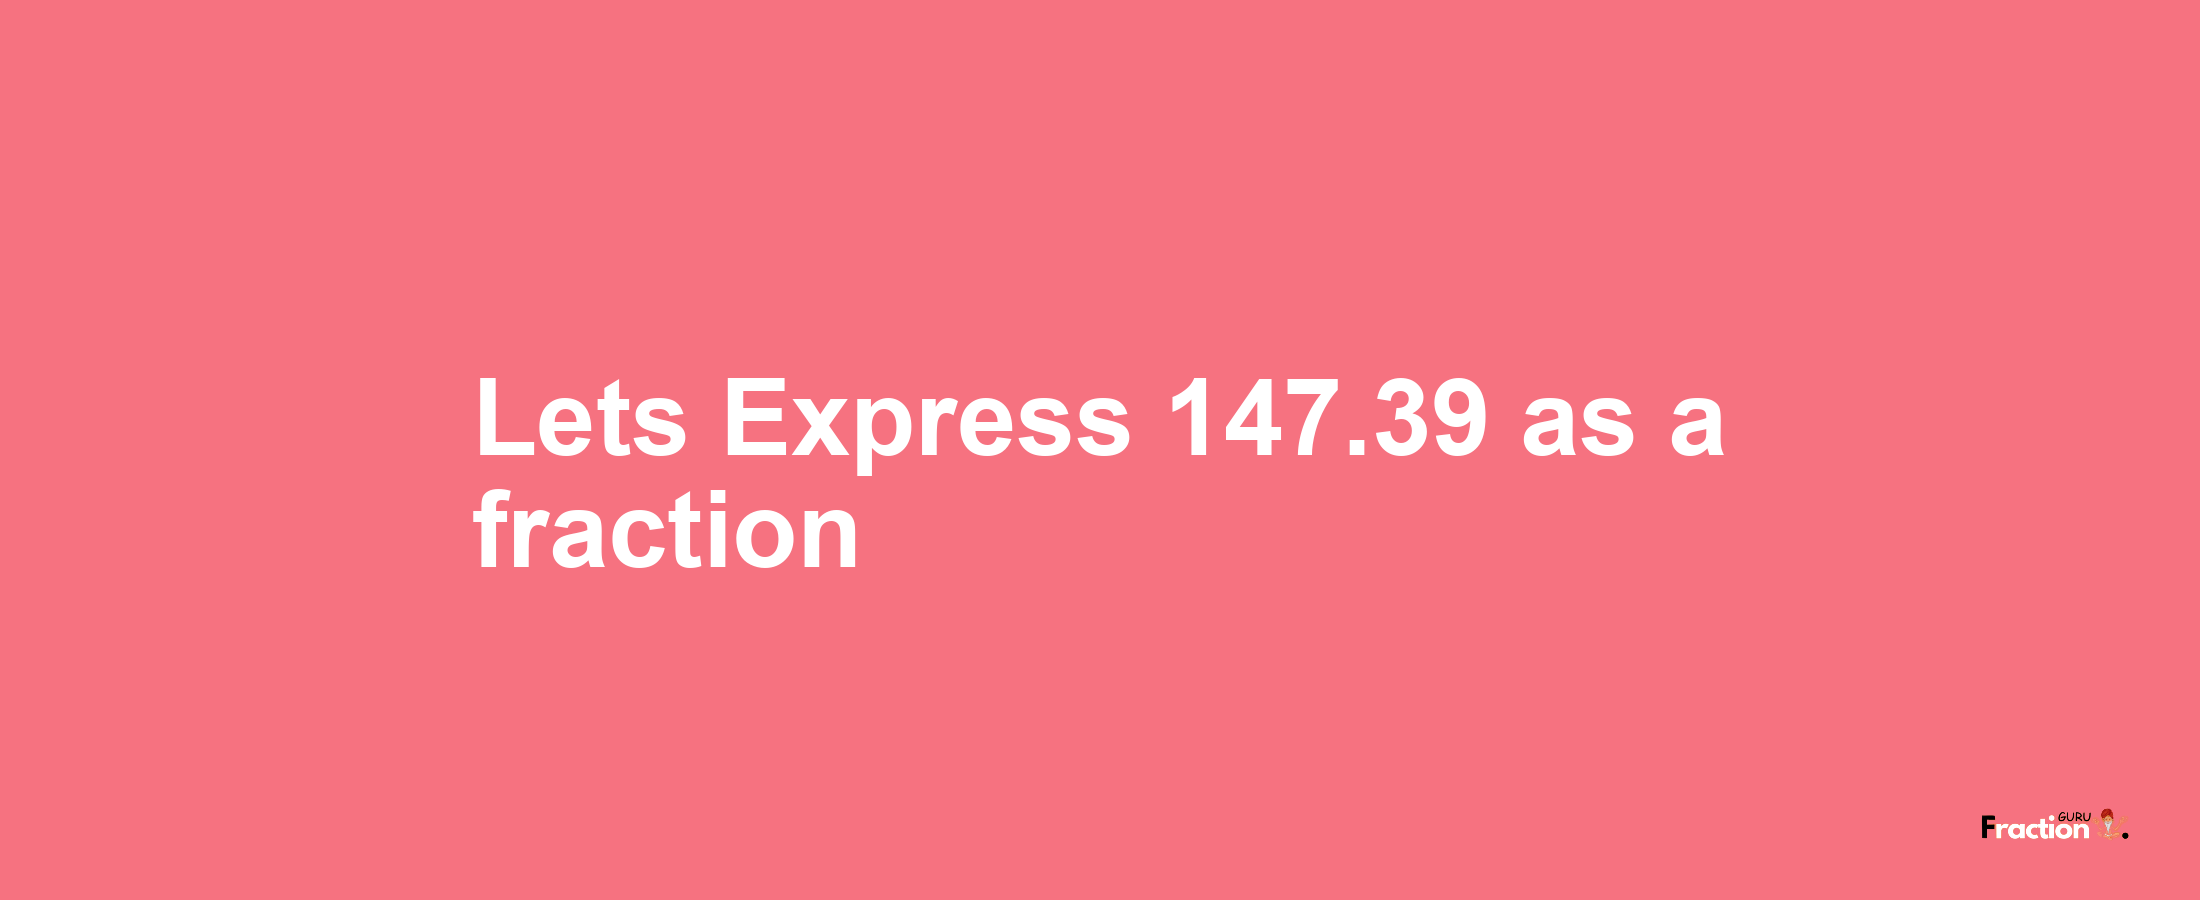 Lets Express 147.39 as afraction